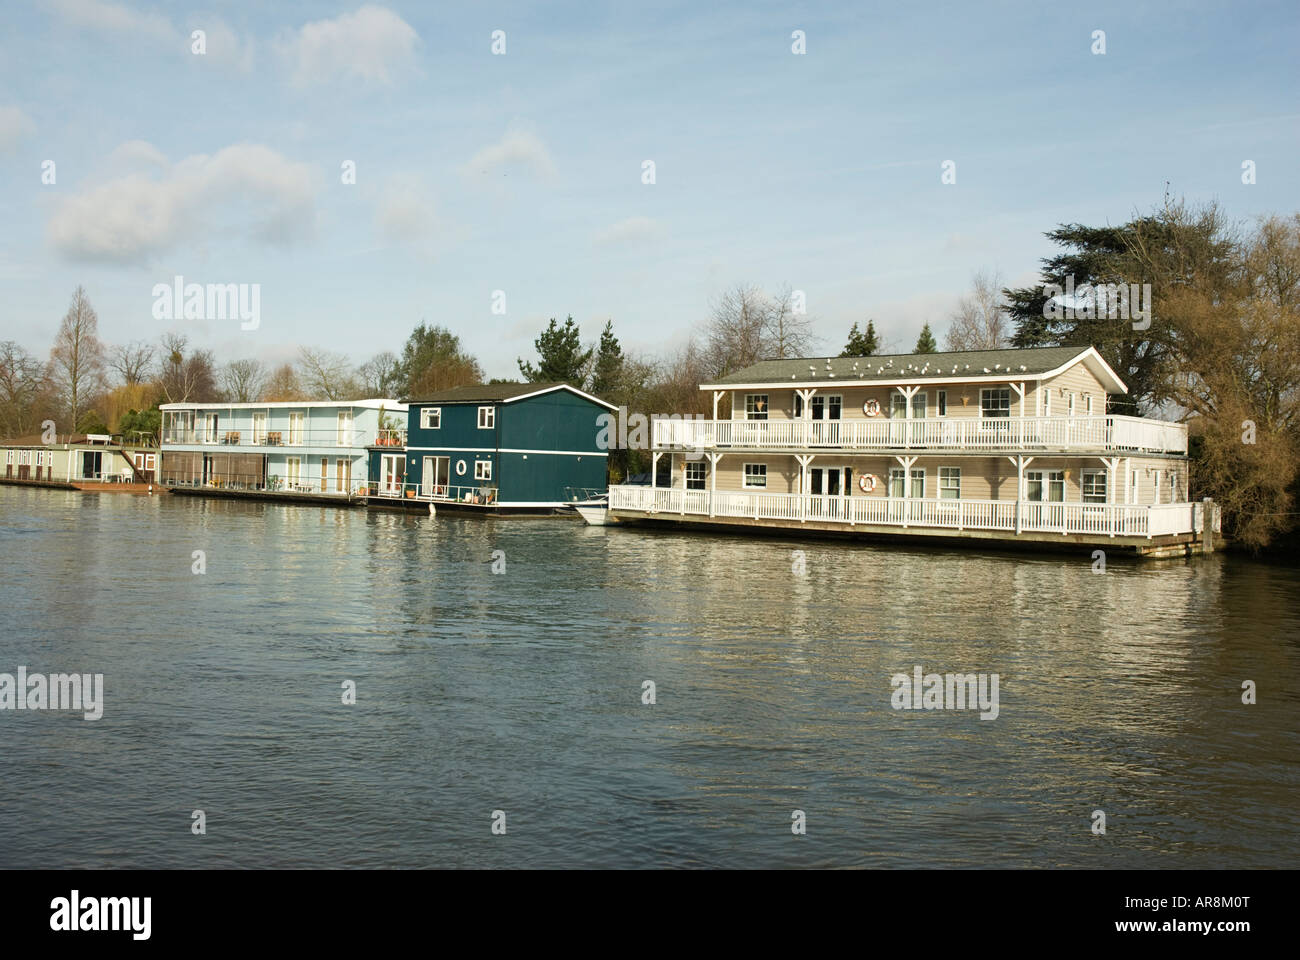 Large expensive 2 storey houseboats on river Thames Stock Photo